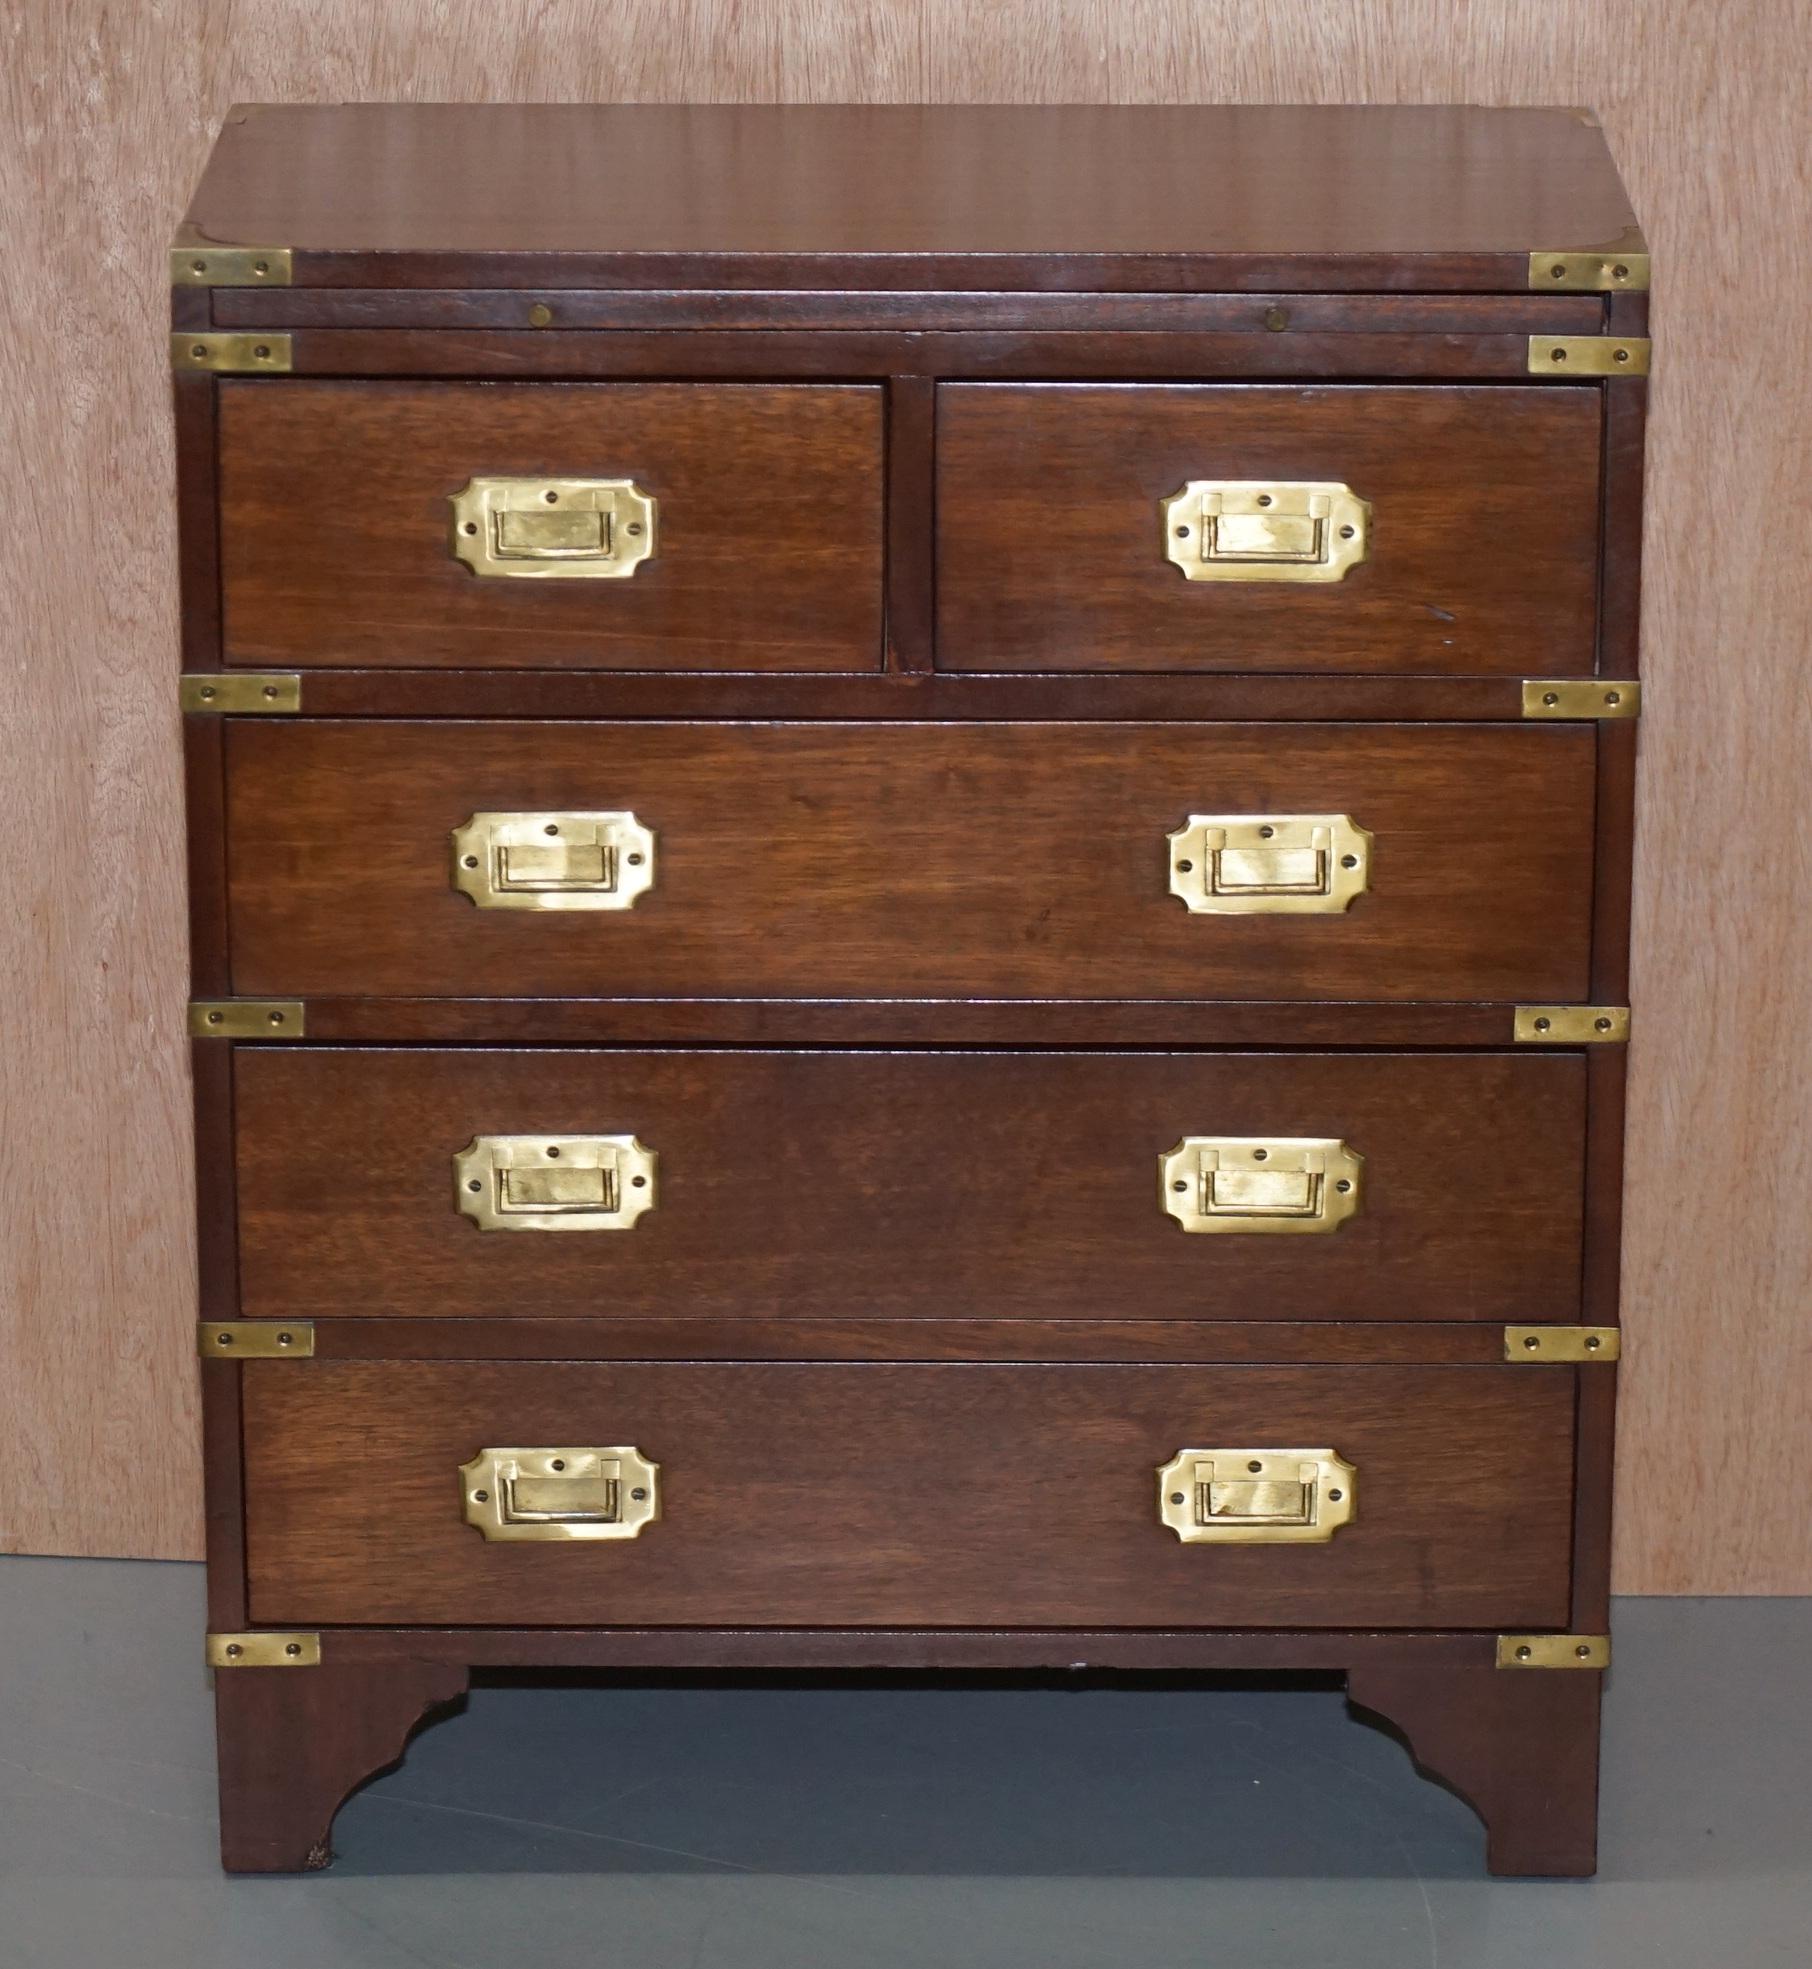 We are delighted to offer for sale this lovely vintage mahogany bachelors chest of drawers with sliding butlers serving tray made by REH Kennedy and retailed through Harrods, London

A very good looking and well made chest of drawers with a